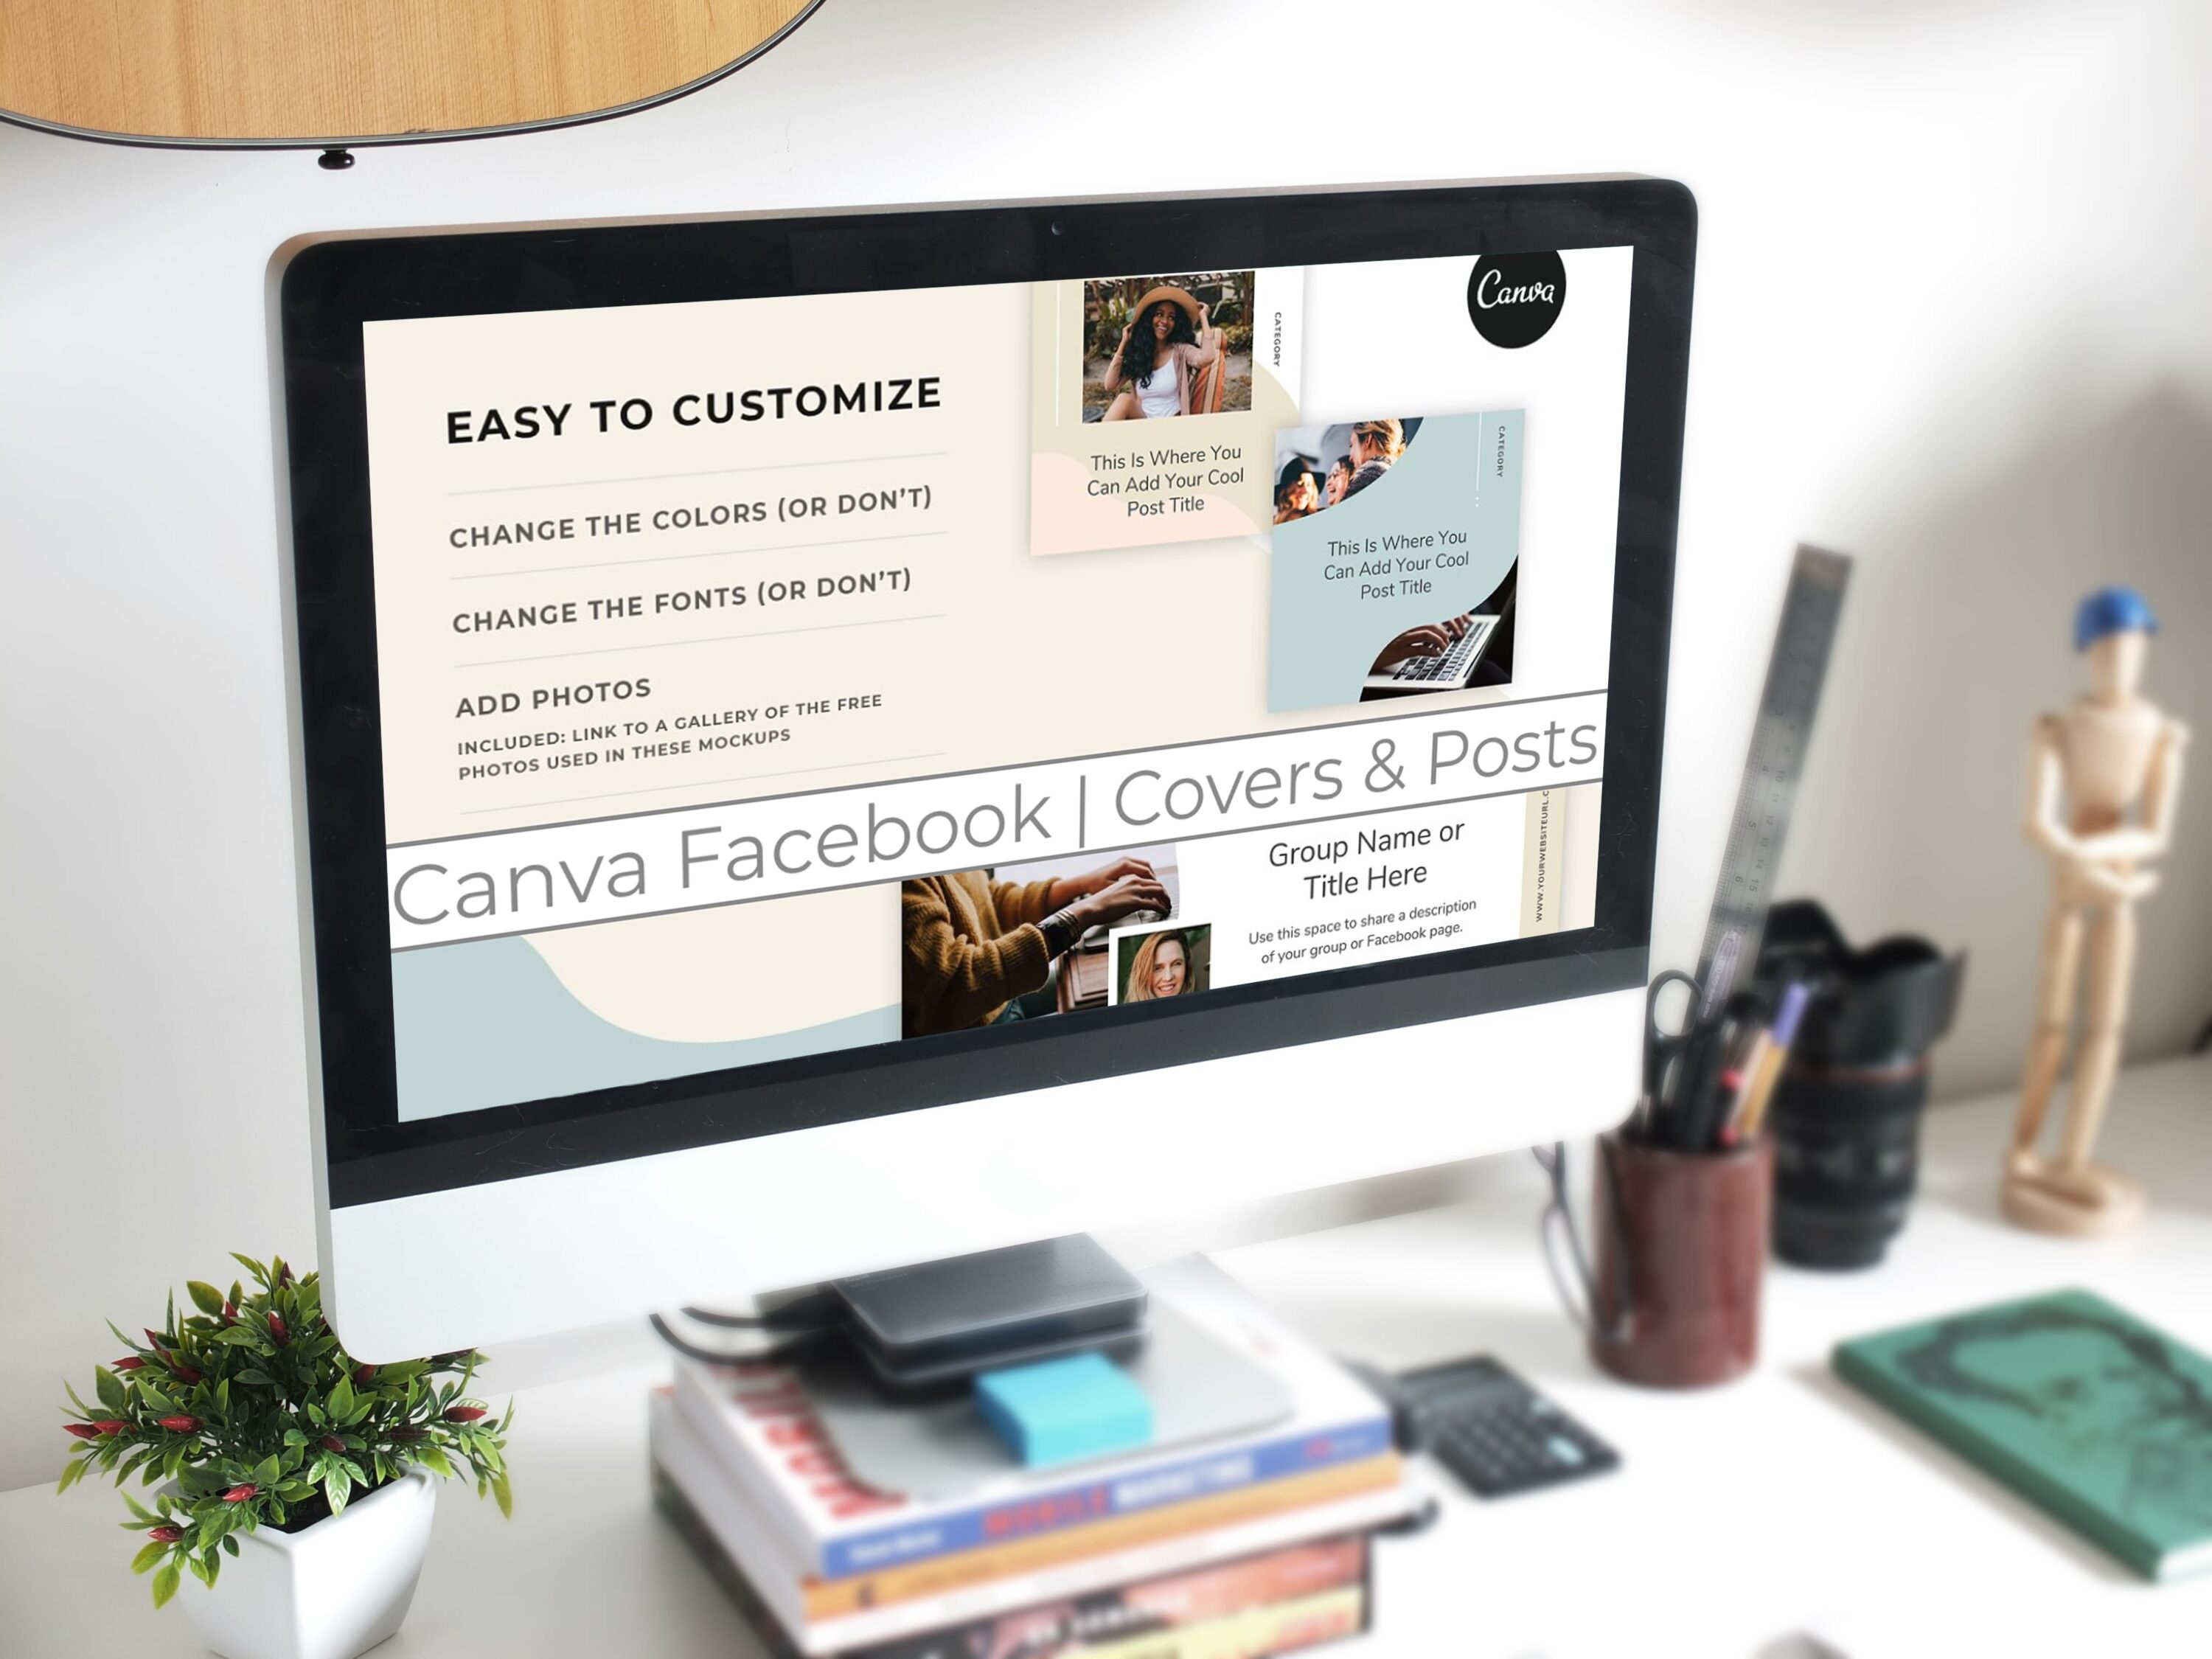 Desktop option of the Canva Facebook | Covers & Posts.